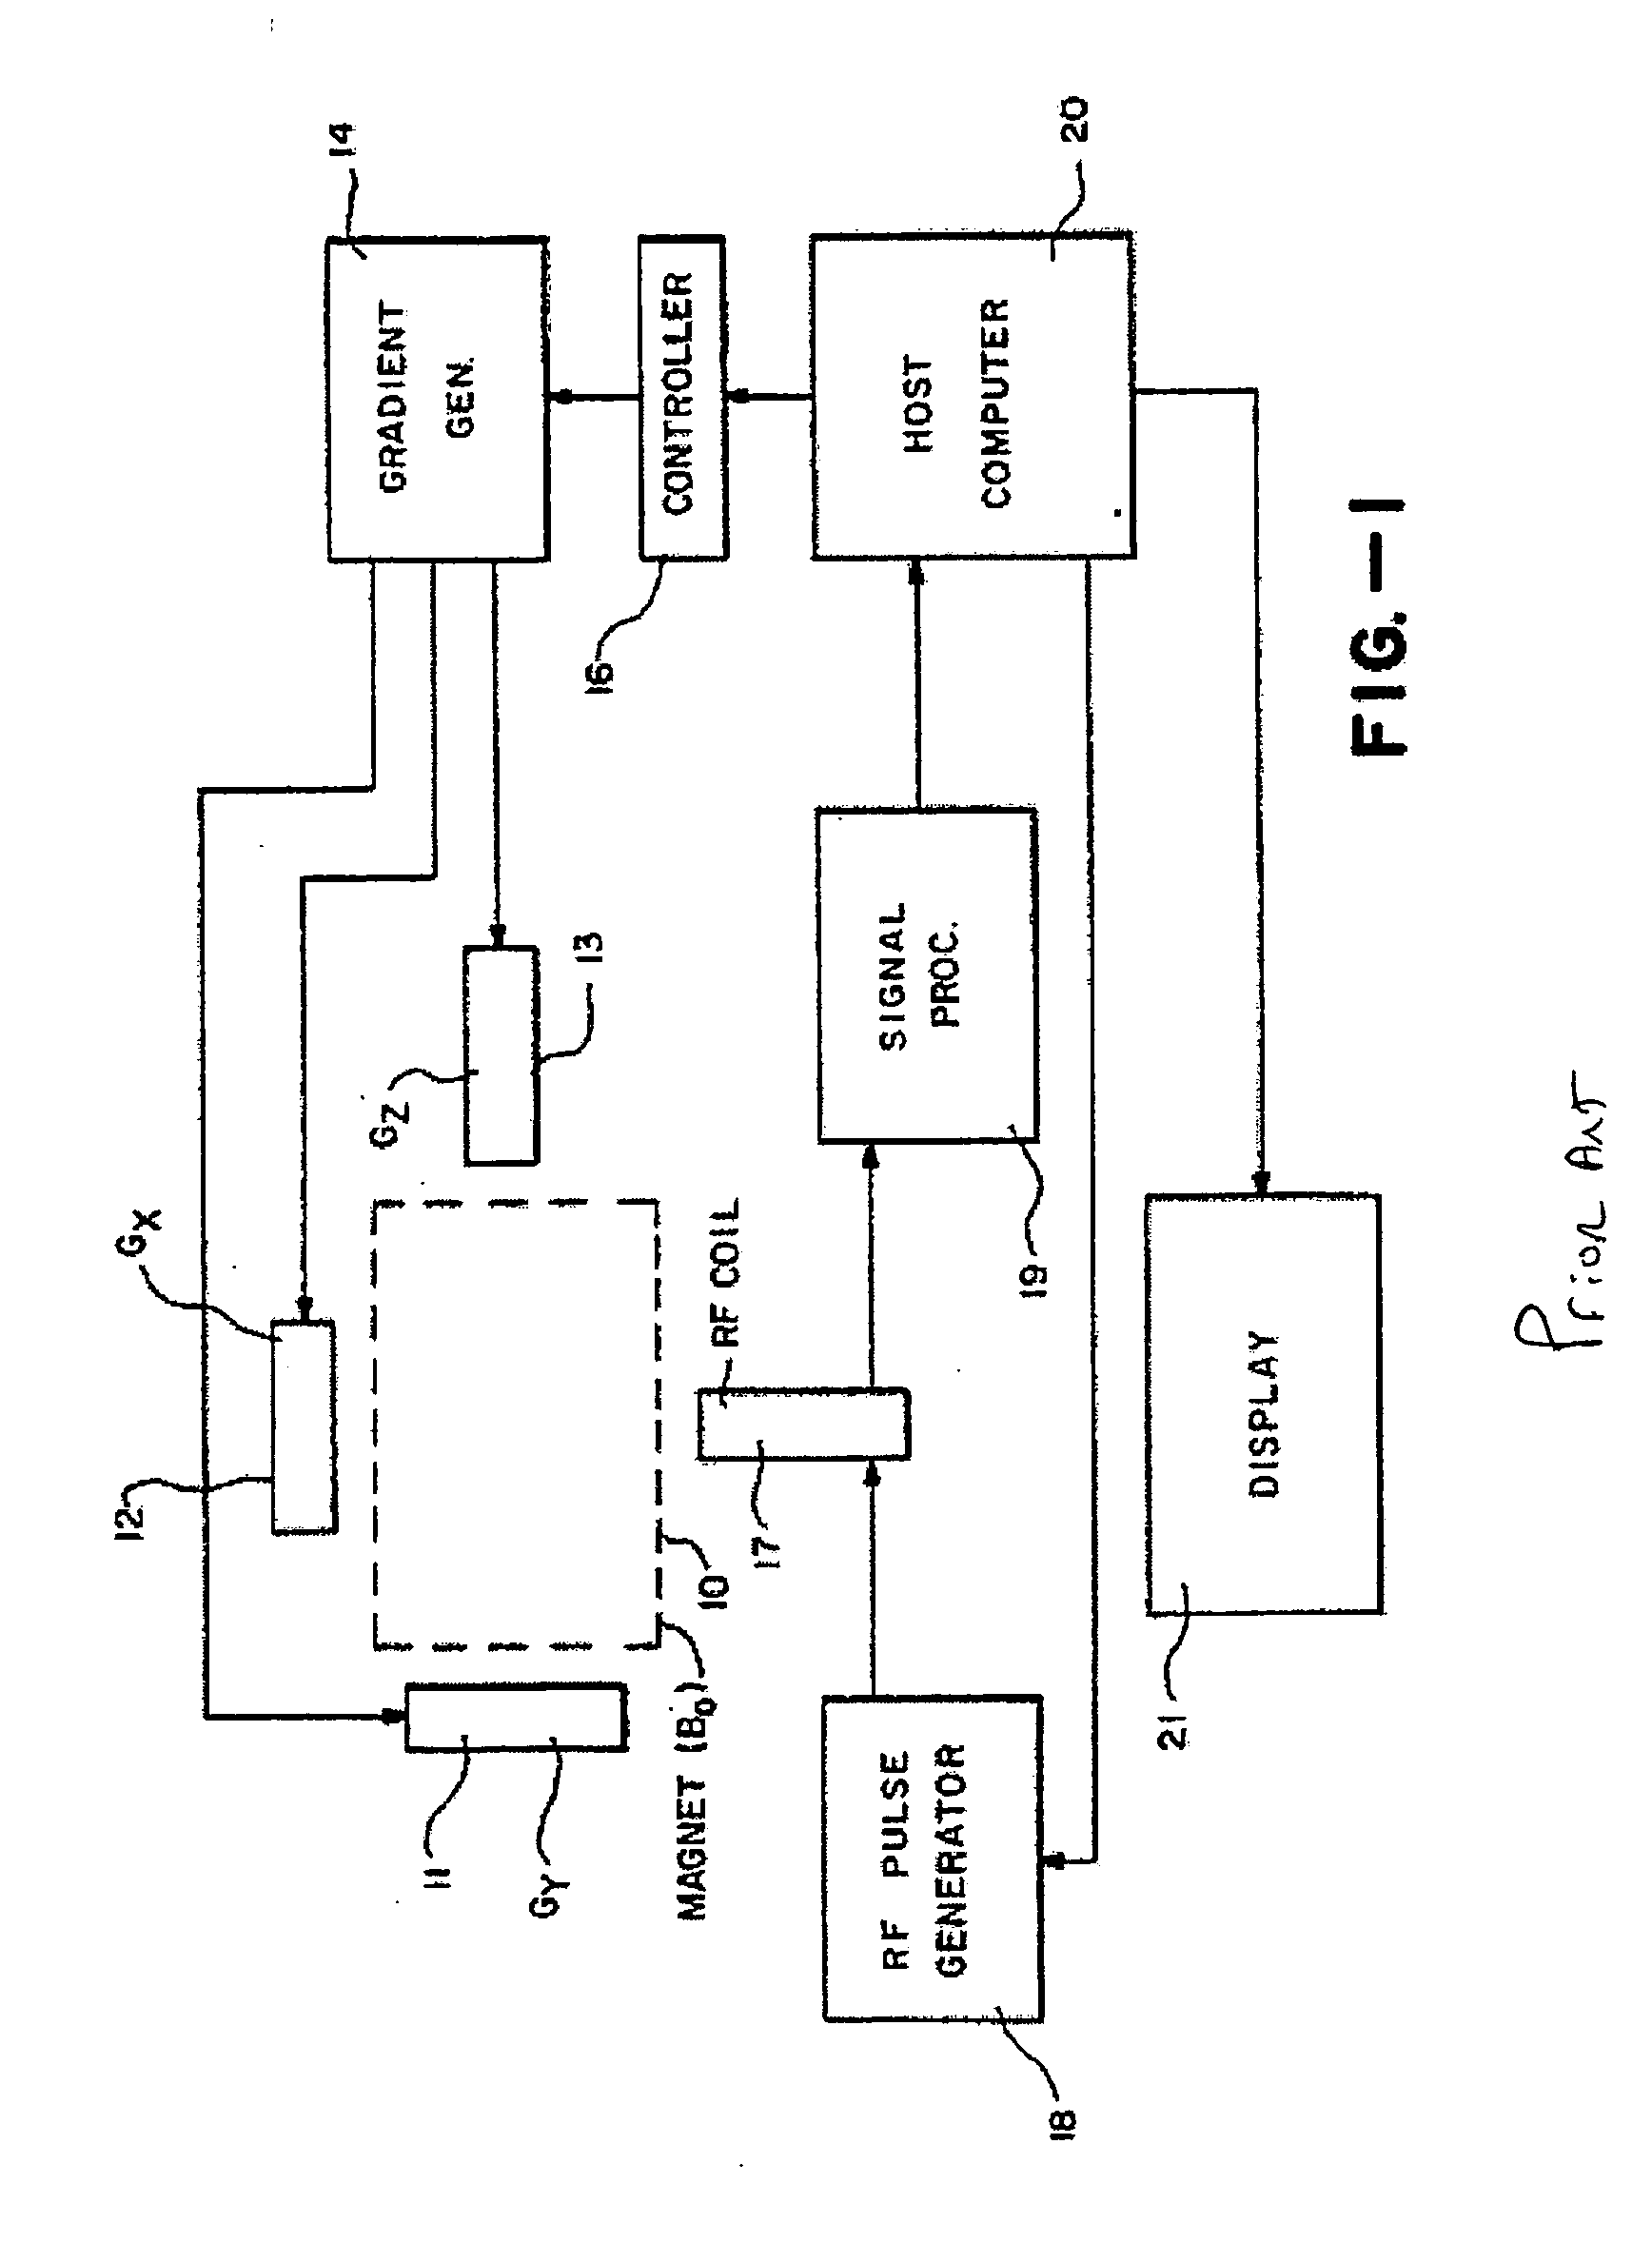 Combined magnetic resonance data acquisition of multi-contrast images using variable acquisition parameters and k-space data sharing